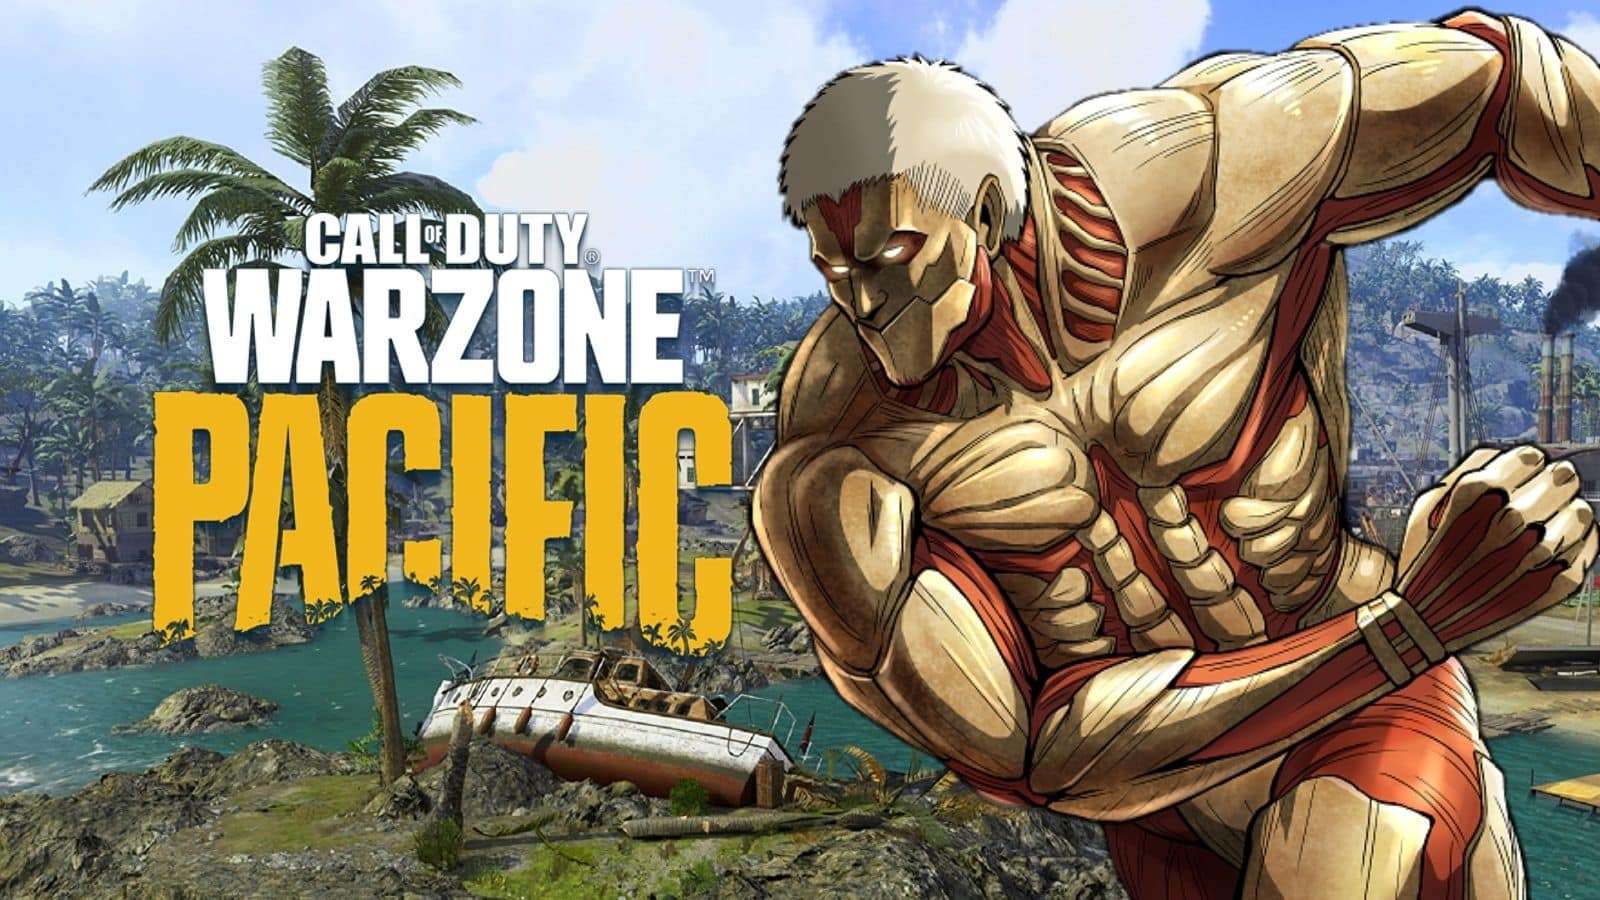 Attack on Titan character set against the Warzone Pacific logo and backdrop